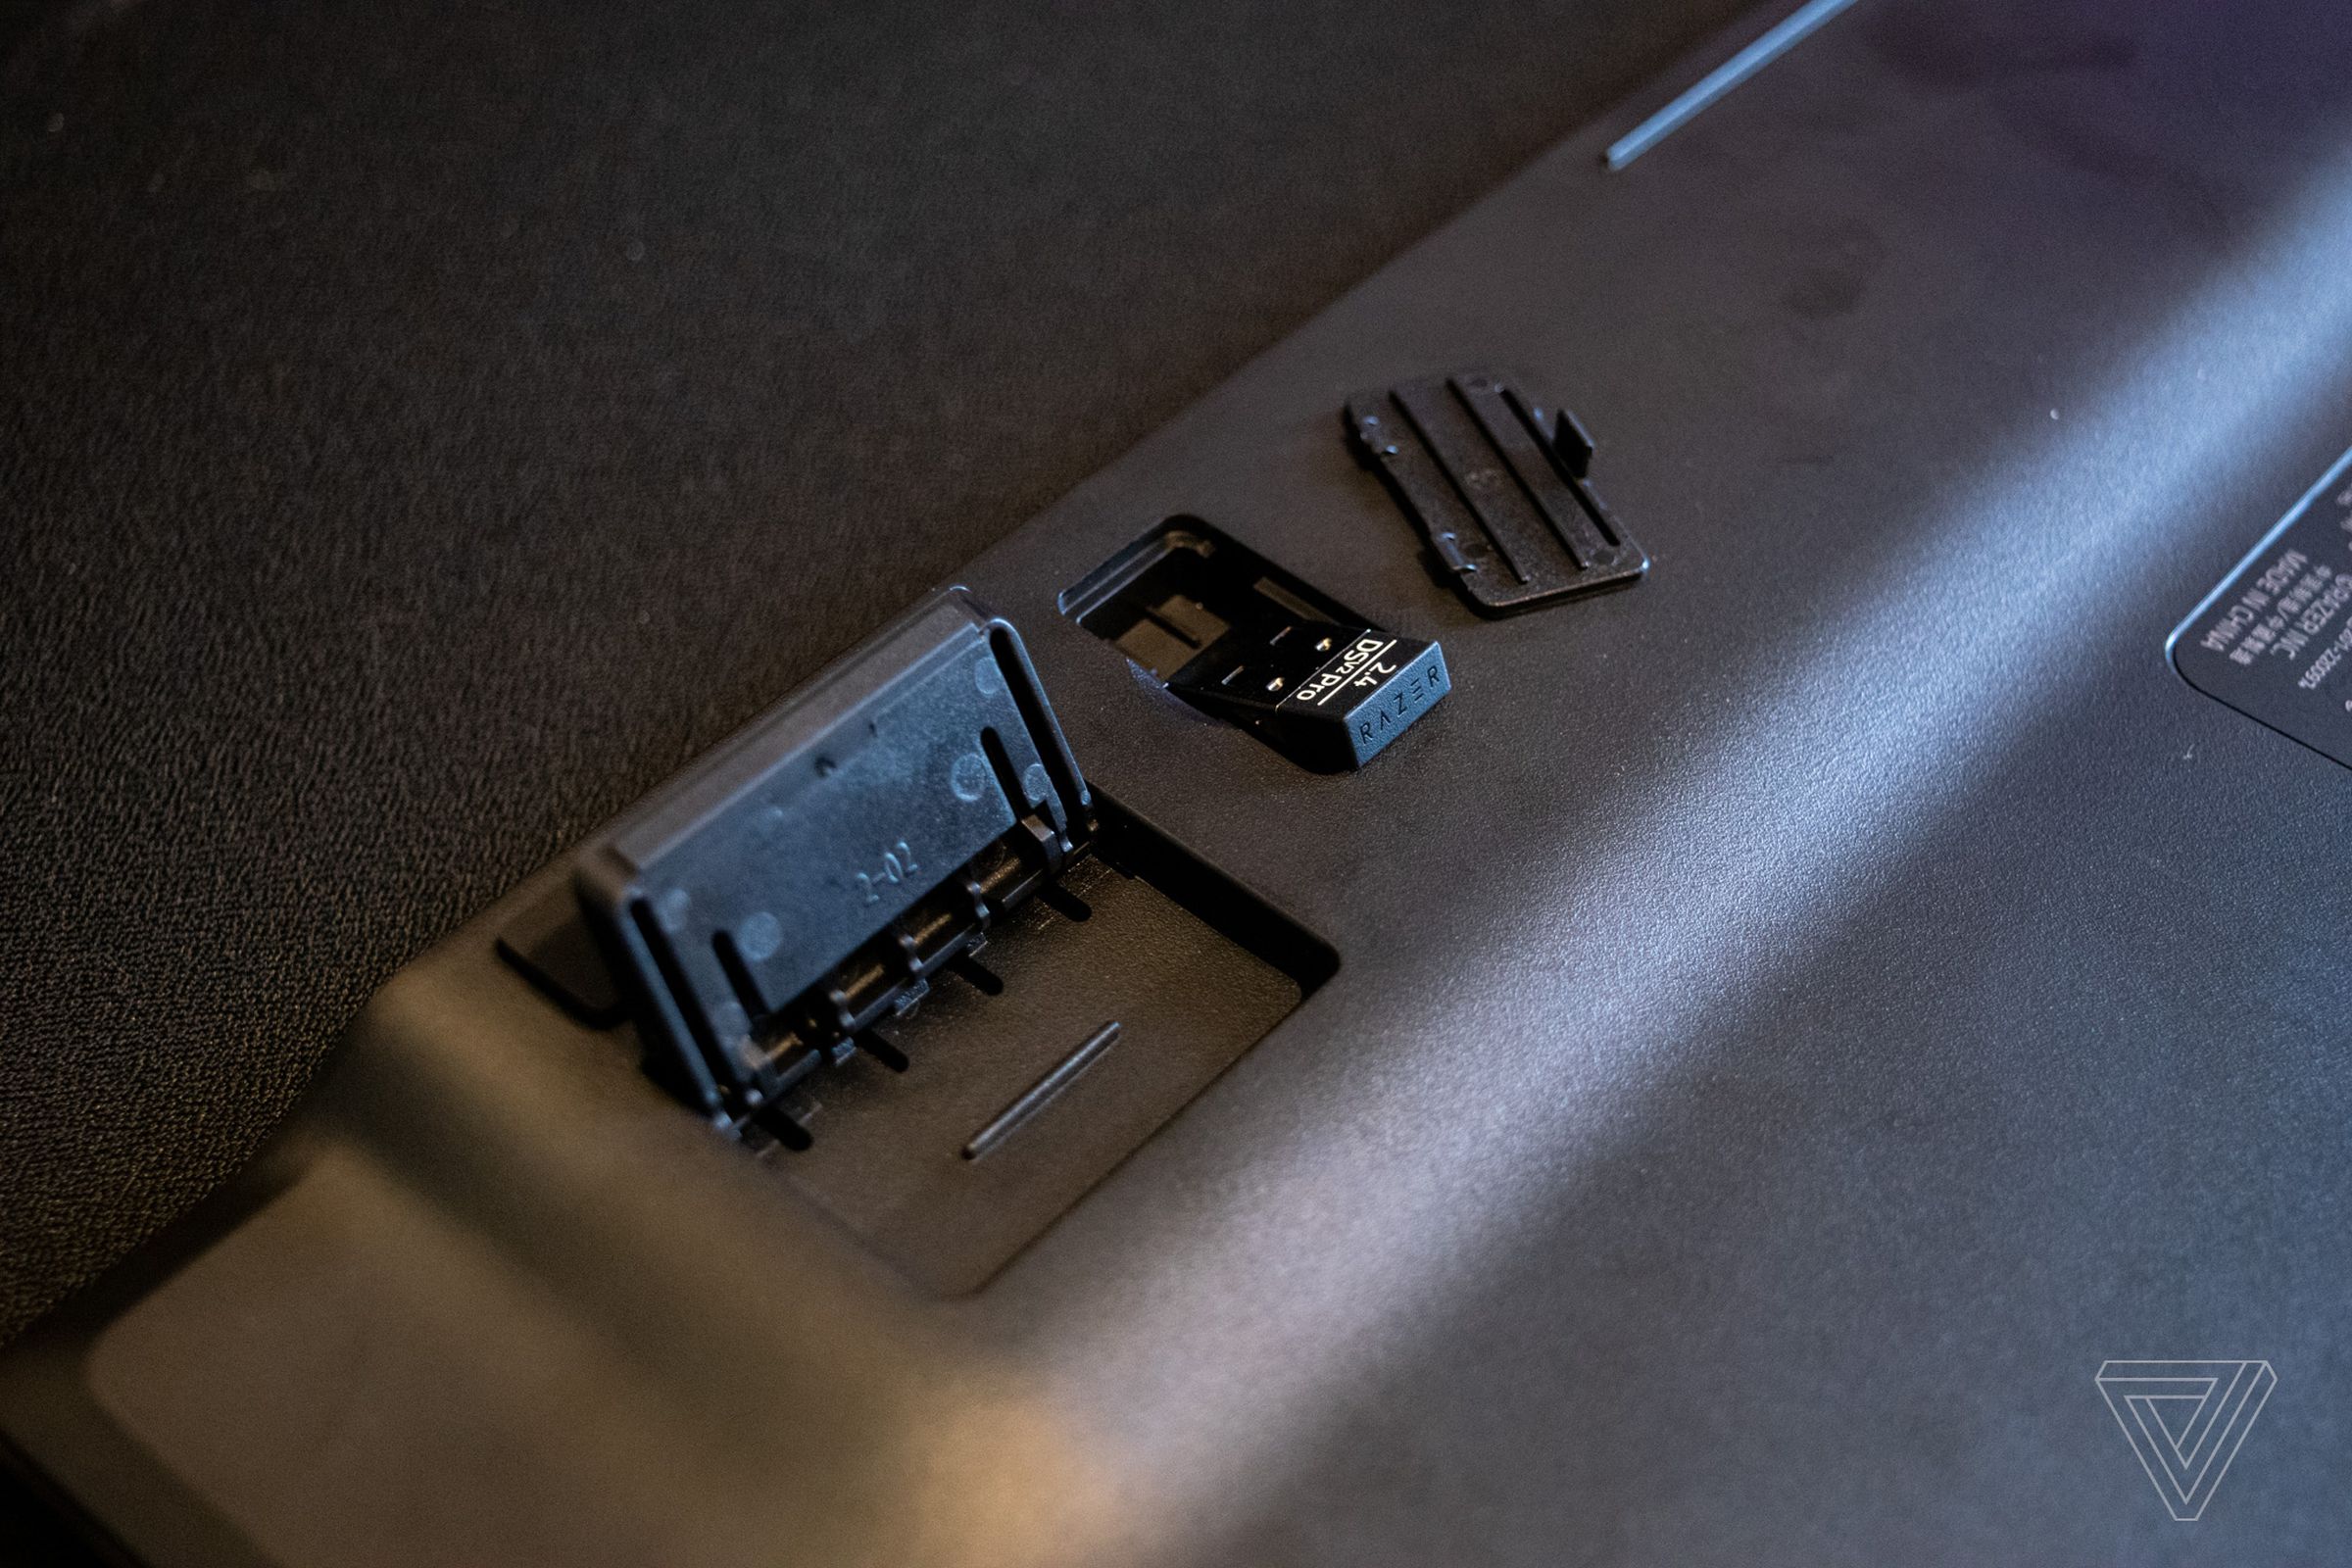 The 2.4Ghz wireless dongle stows neatly away in the base of the chassis.